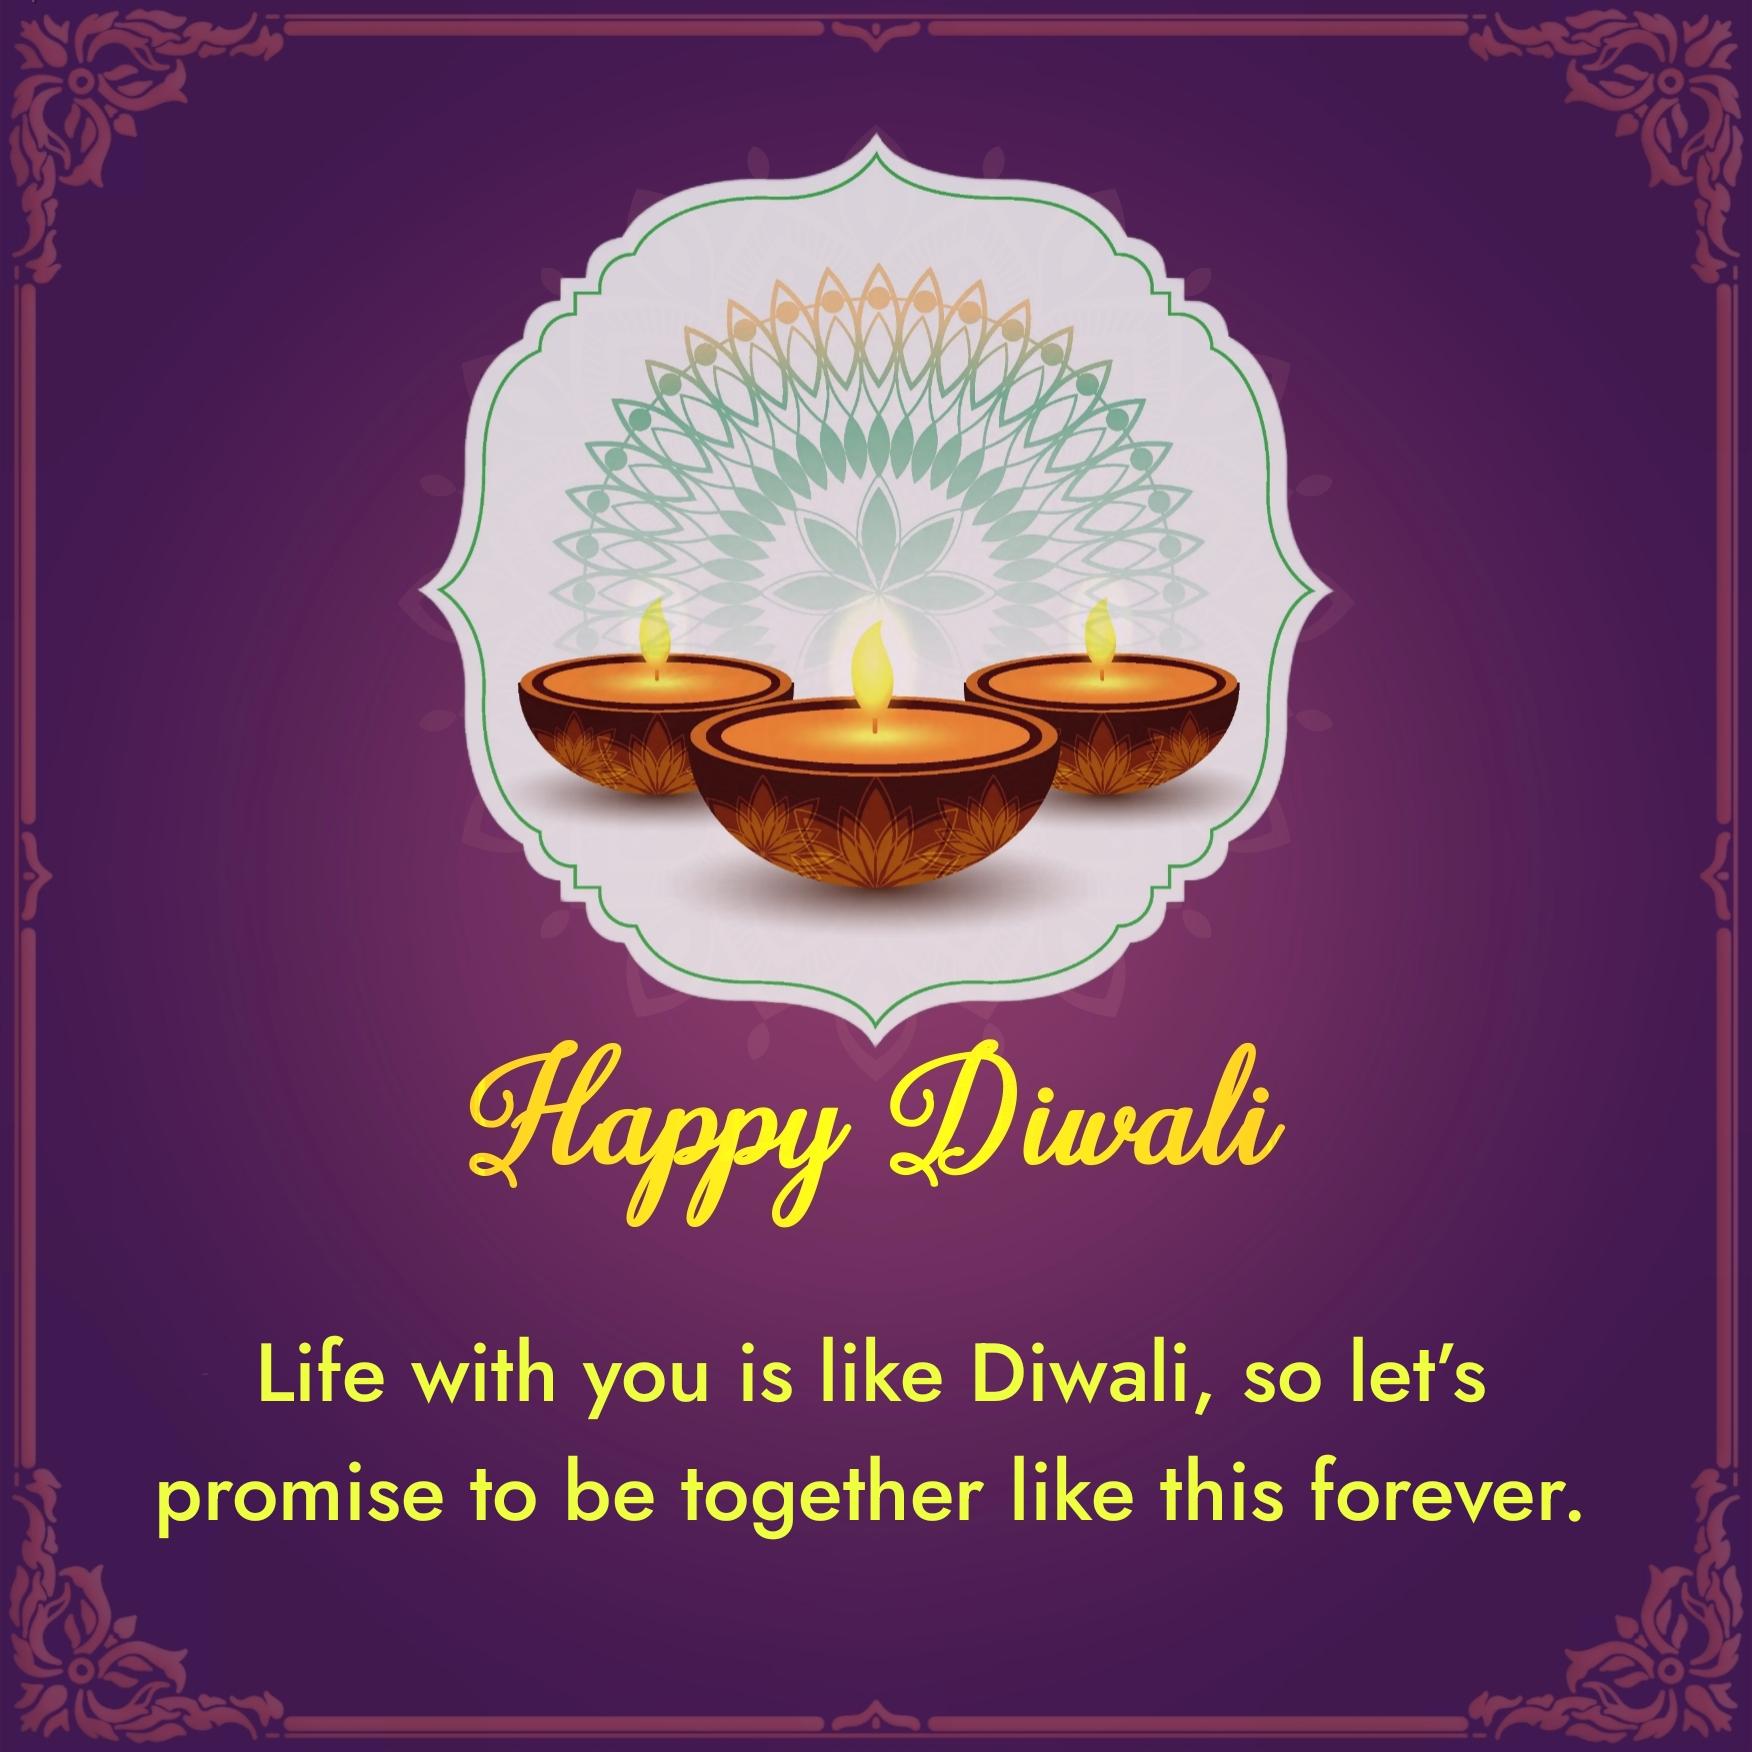 Life with you is like Diwali so lets promise to be together